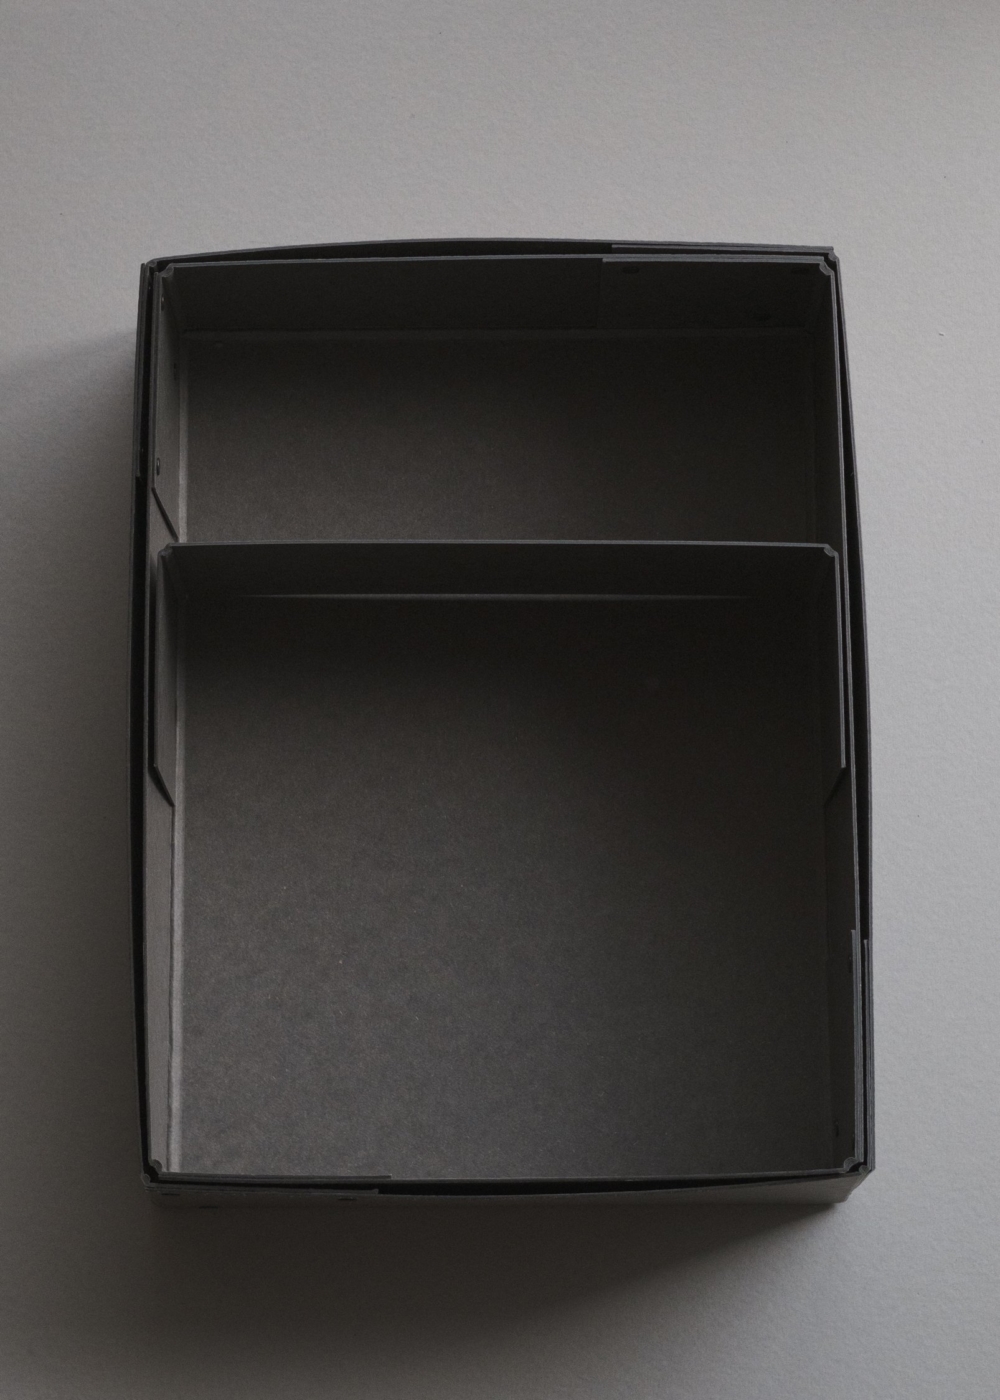 FROME Box Divider for Archival storage box "Rivet Box" - Charcoal Gray